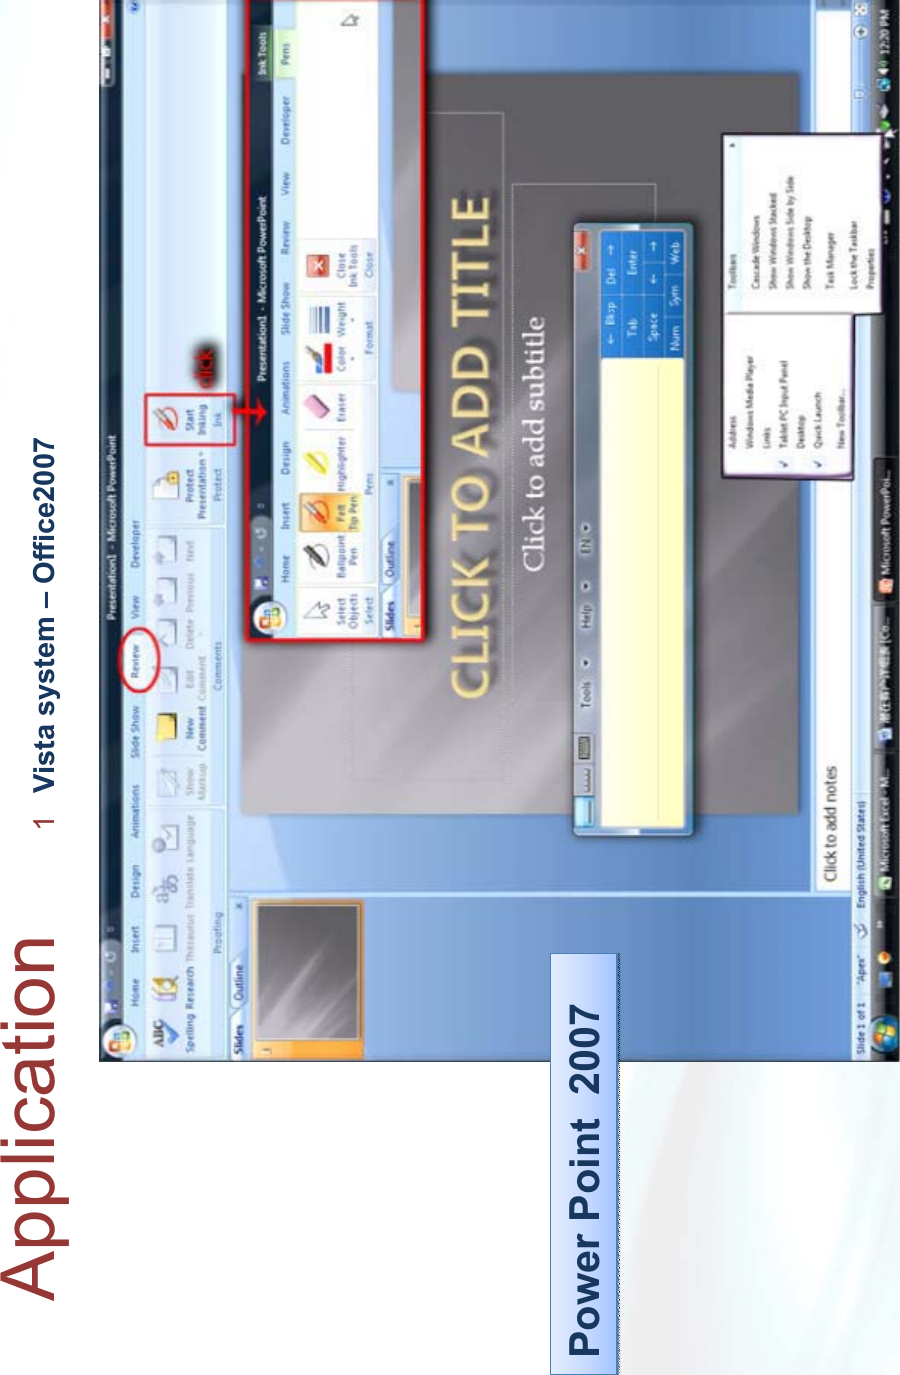 Application 1Vista system – Office2007Power Point  2007Power Point  2007